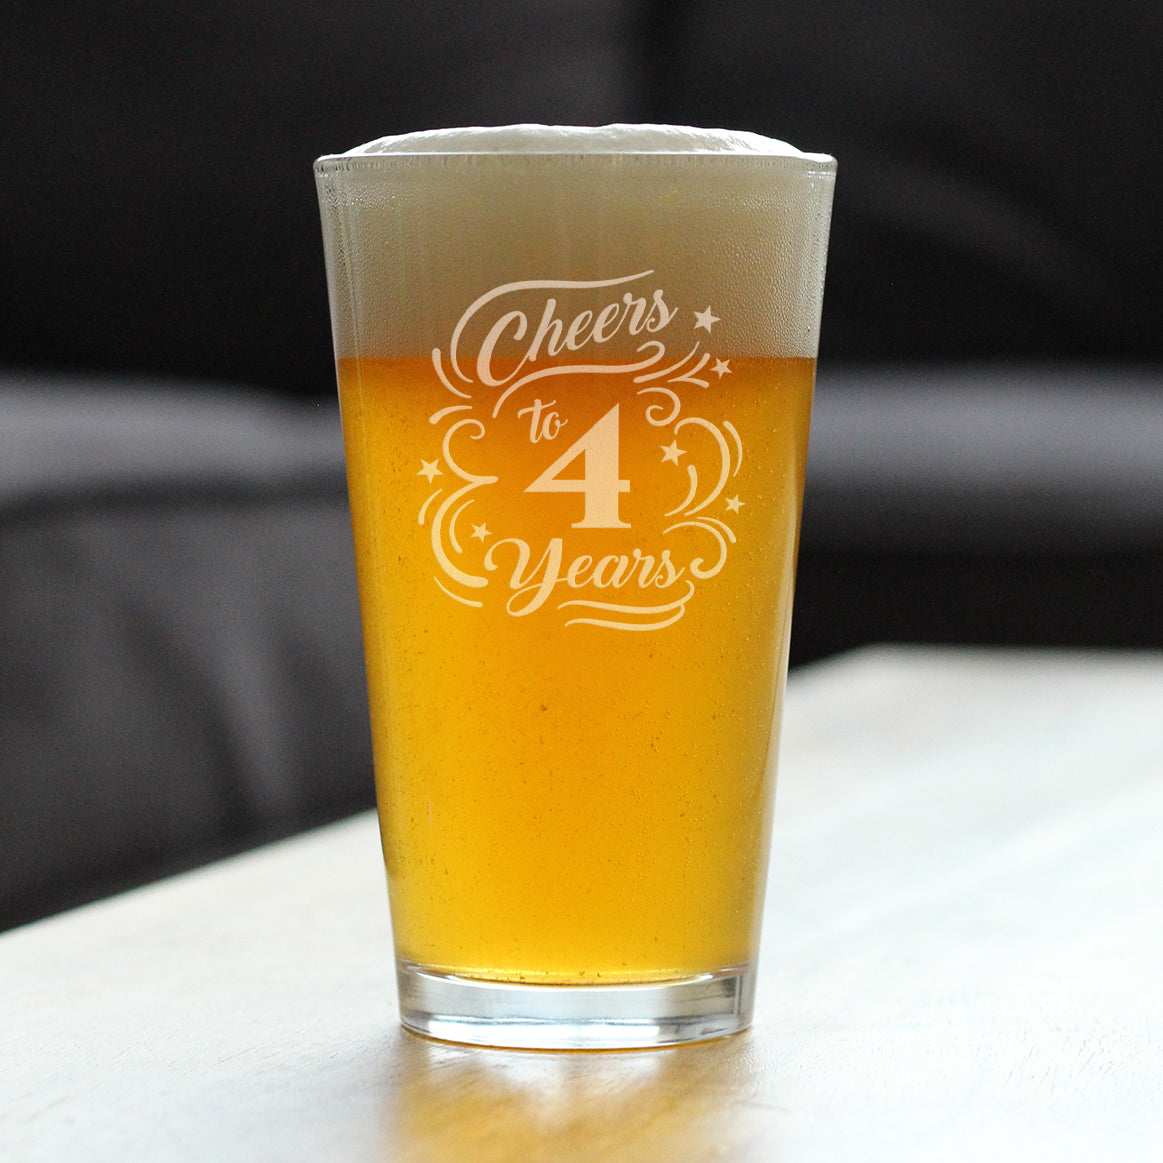 Cheers to 4 Years - Pint Glass for Beer - Gifts for Women &amp; Men - 4th Anniversary Party Decor - 16 Oz Glasses